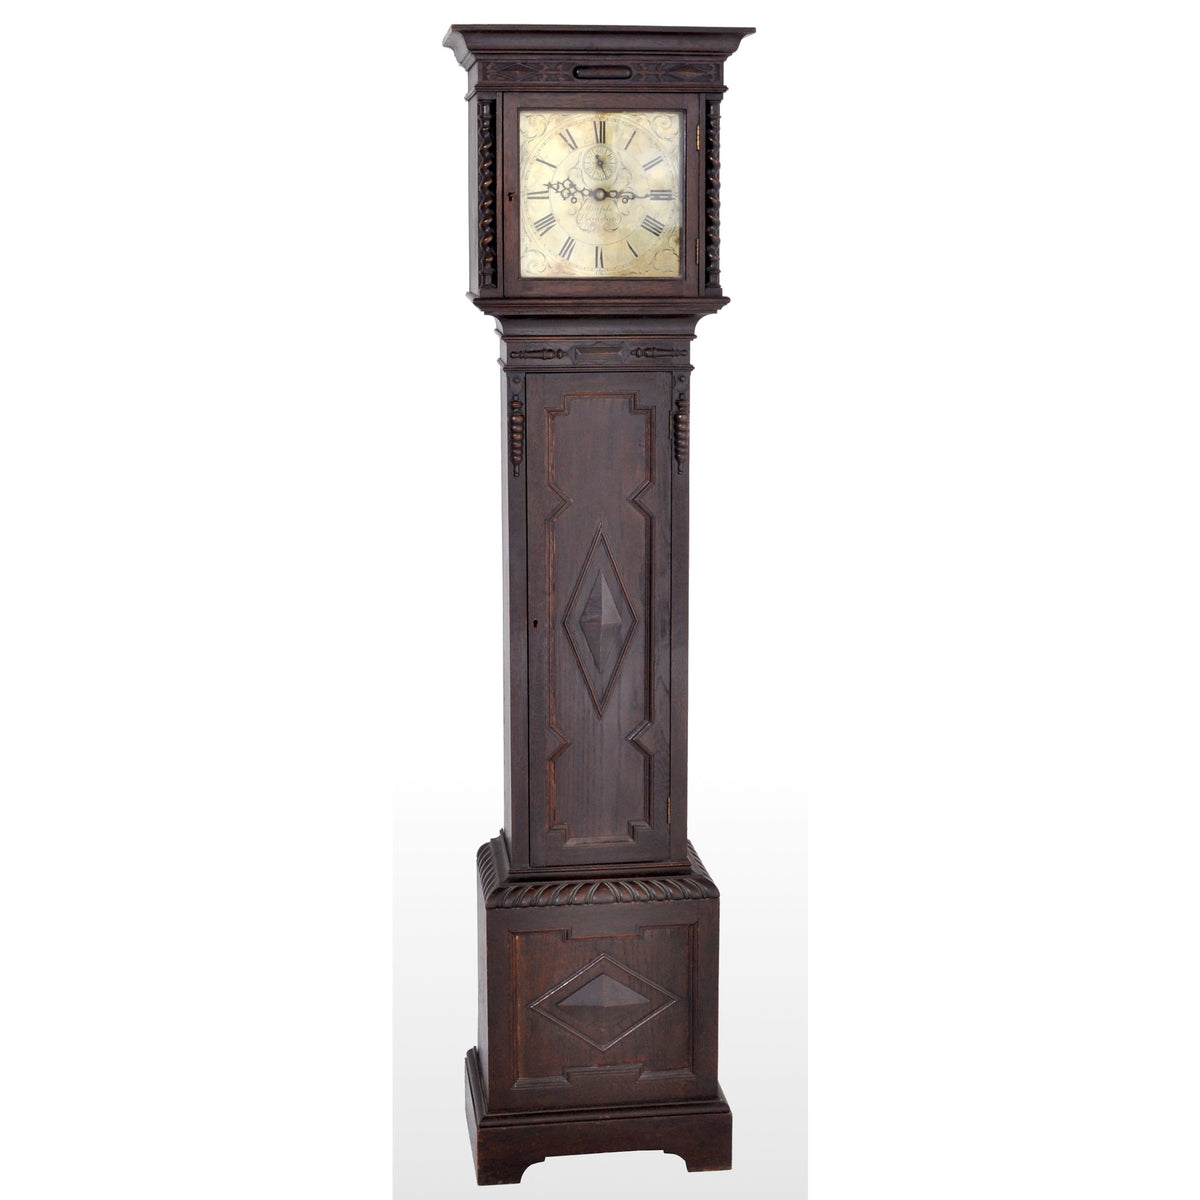 Antique English Arts & Crafts 8-Day Longcase/Grandfather Clock by Maple of London, circa 1890